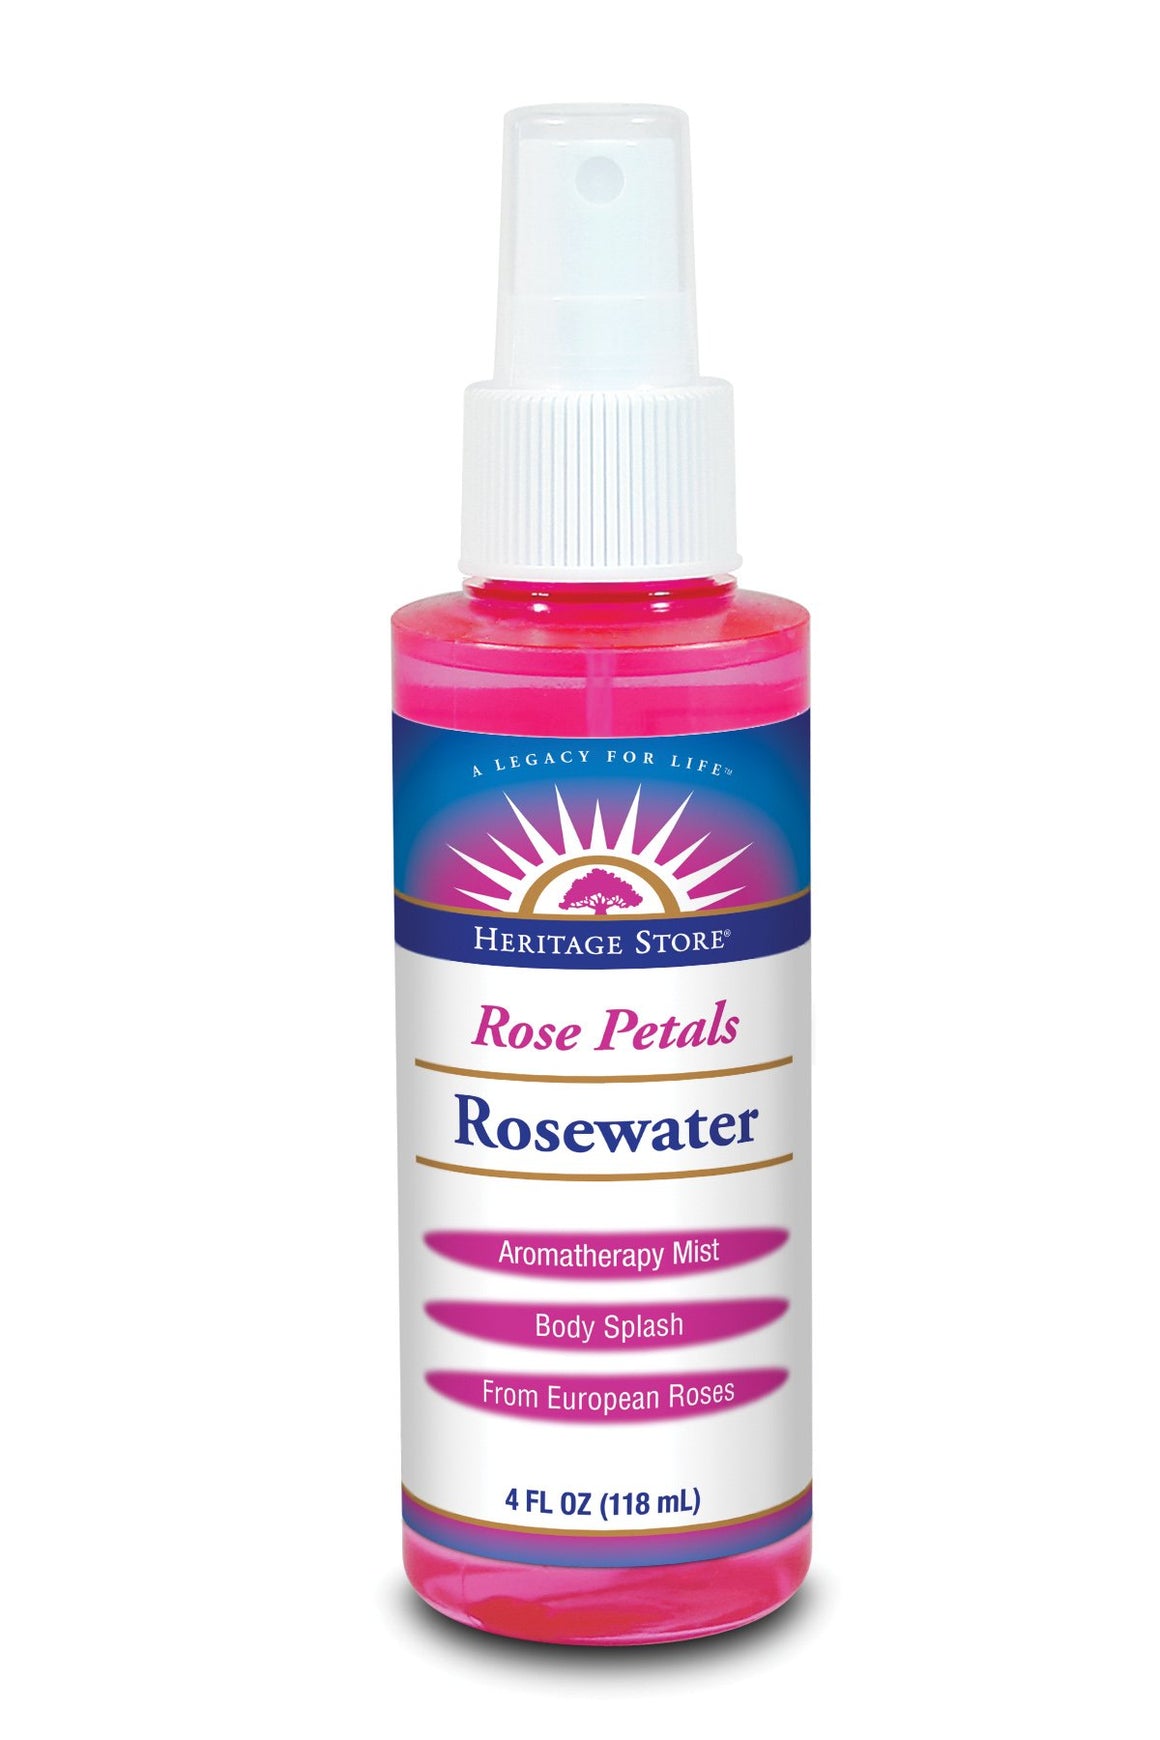 A bottle of Heritage Store Rosewater with Atomizer 4 fl oz